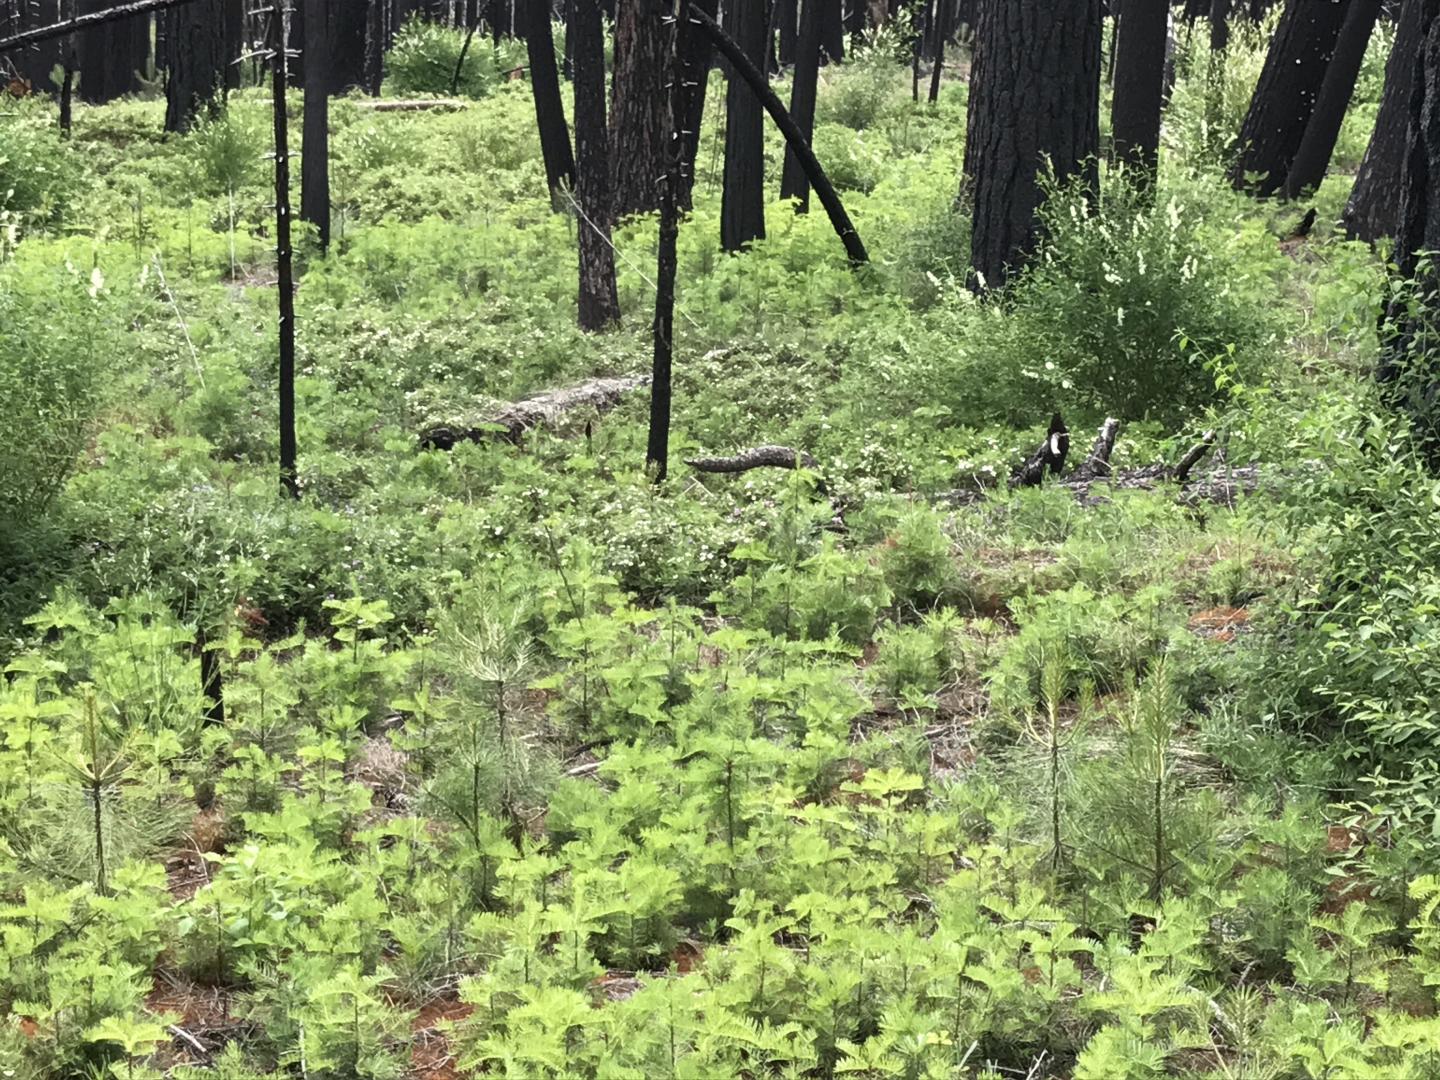 Unlogged 'Snag Forest Habitat' Four Years After the Rim Fire